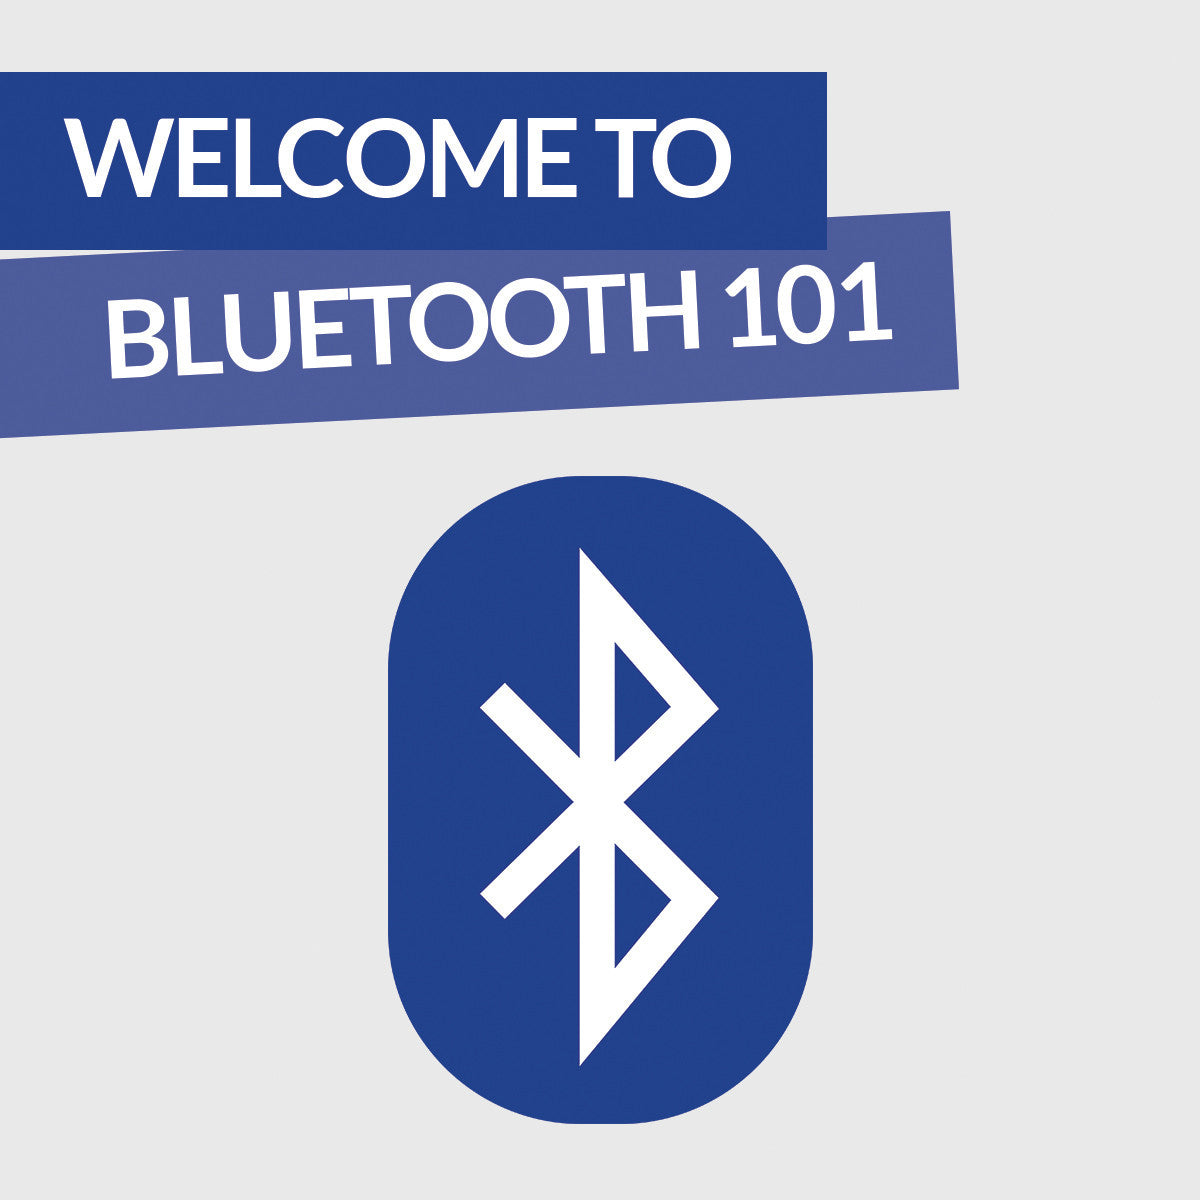 Welcome to Bluetooth 101